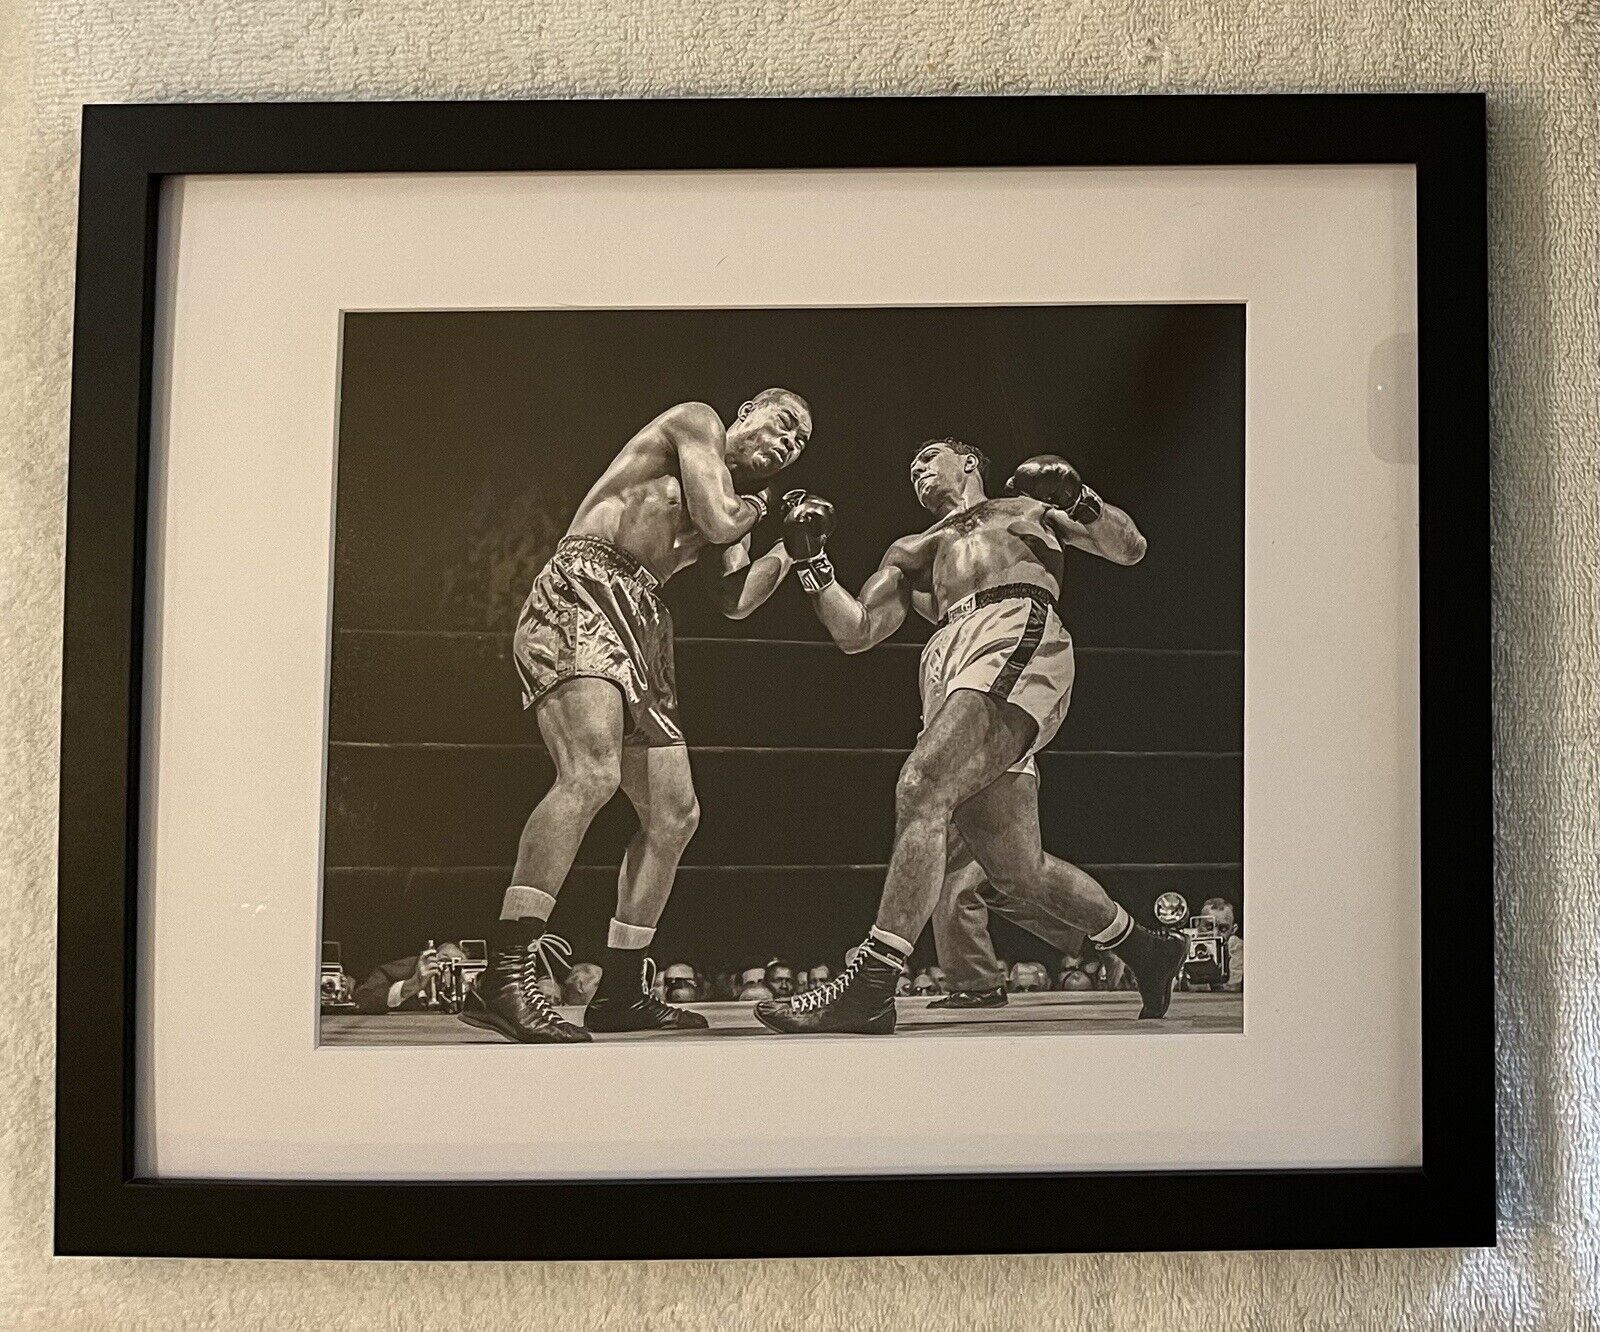 Rocky Marciano vs Joe Louis-Framed And Matted 8x10 Photo-Ready To Hang-Nice